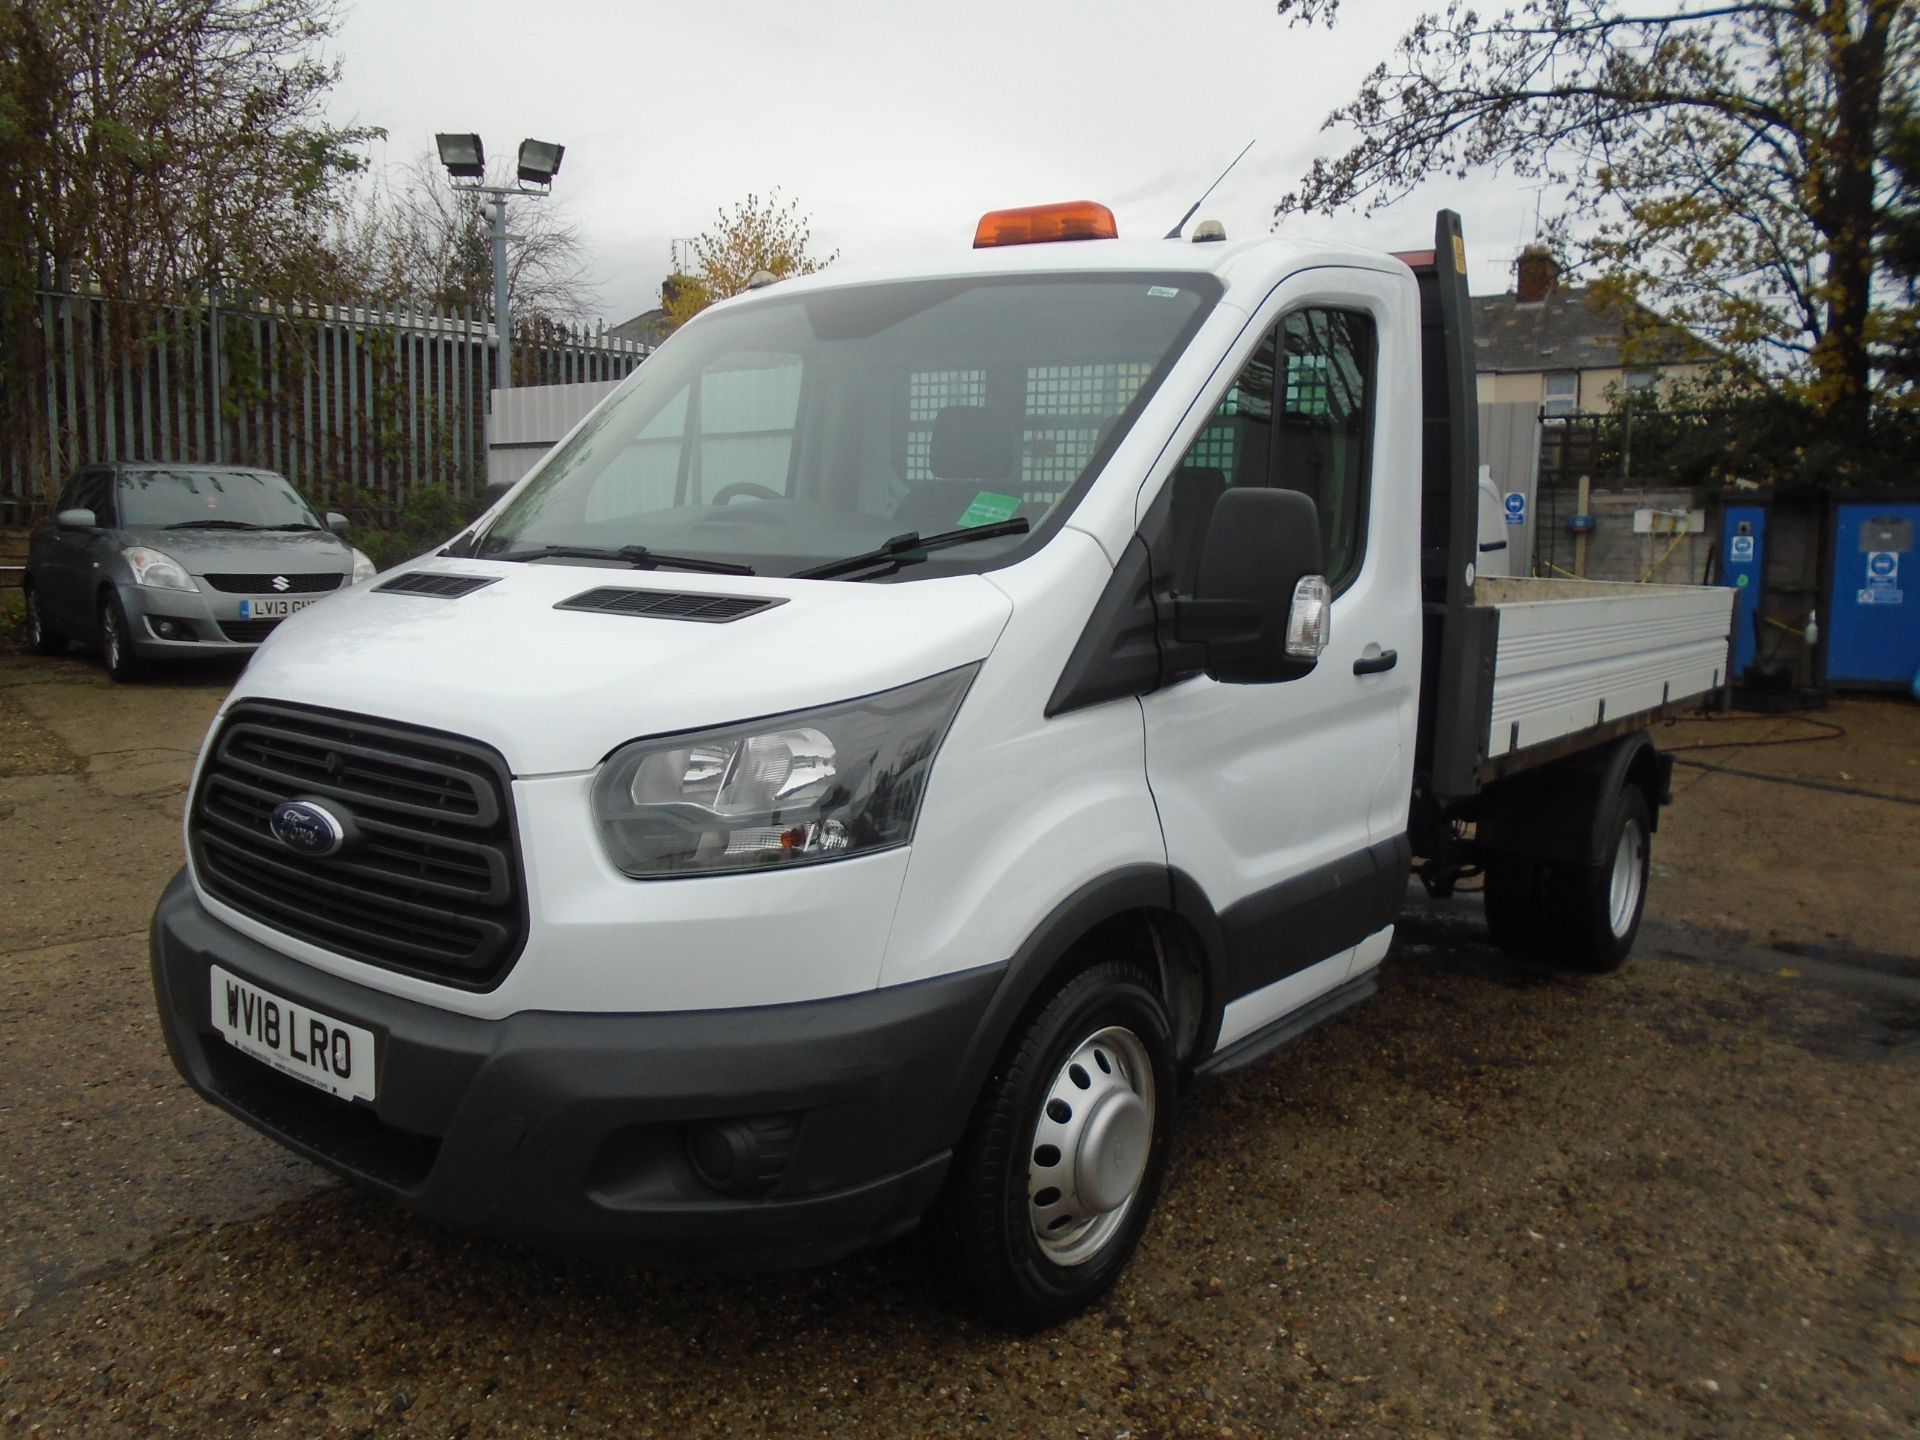 2018 Ford Transit 2.0 Tdci 130Ps One Stop Tipper [1 Way] (WV18LRO) Thumbnail 3